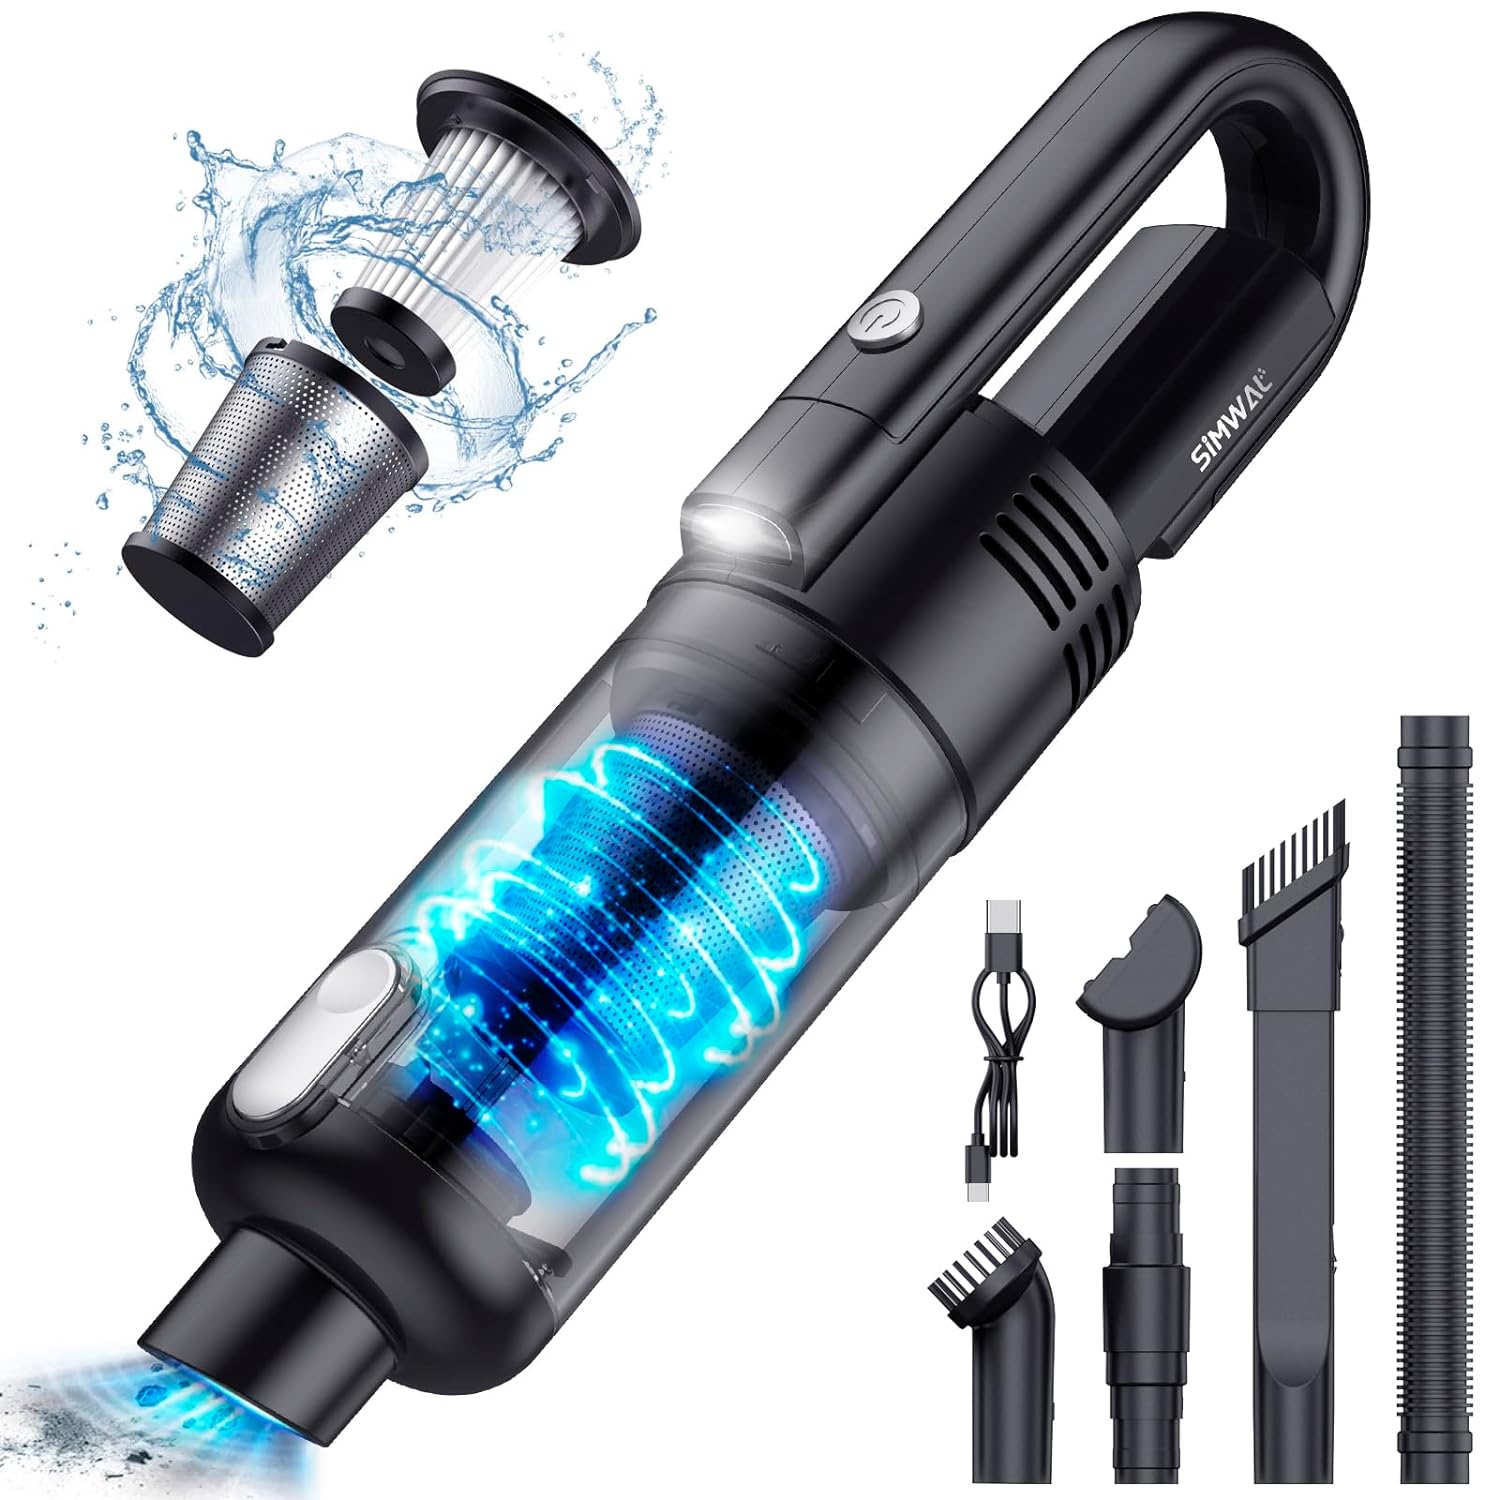 SIMWAL Mini Handheld Vacuum,7500PA Powerful Suction Car Vacuum Cleaner Cordless, Portable Rechargeable Hand Held Vacuum with LED Light Canister Filters for Home Office and Pet Hair Cleaning